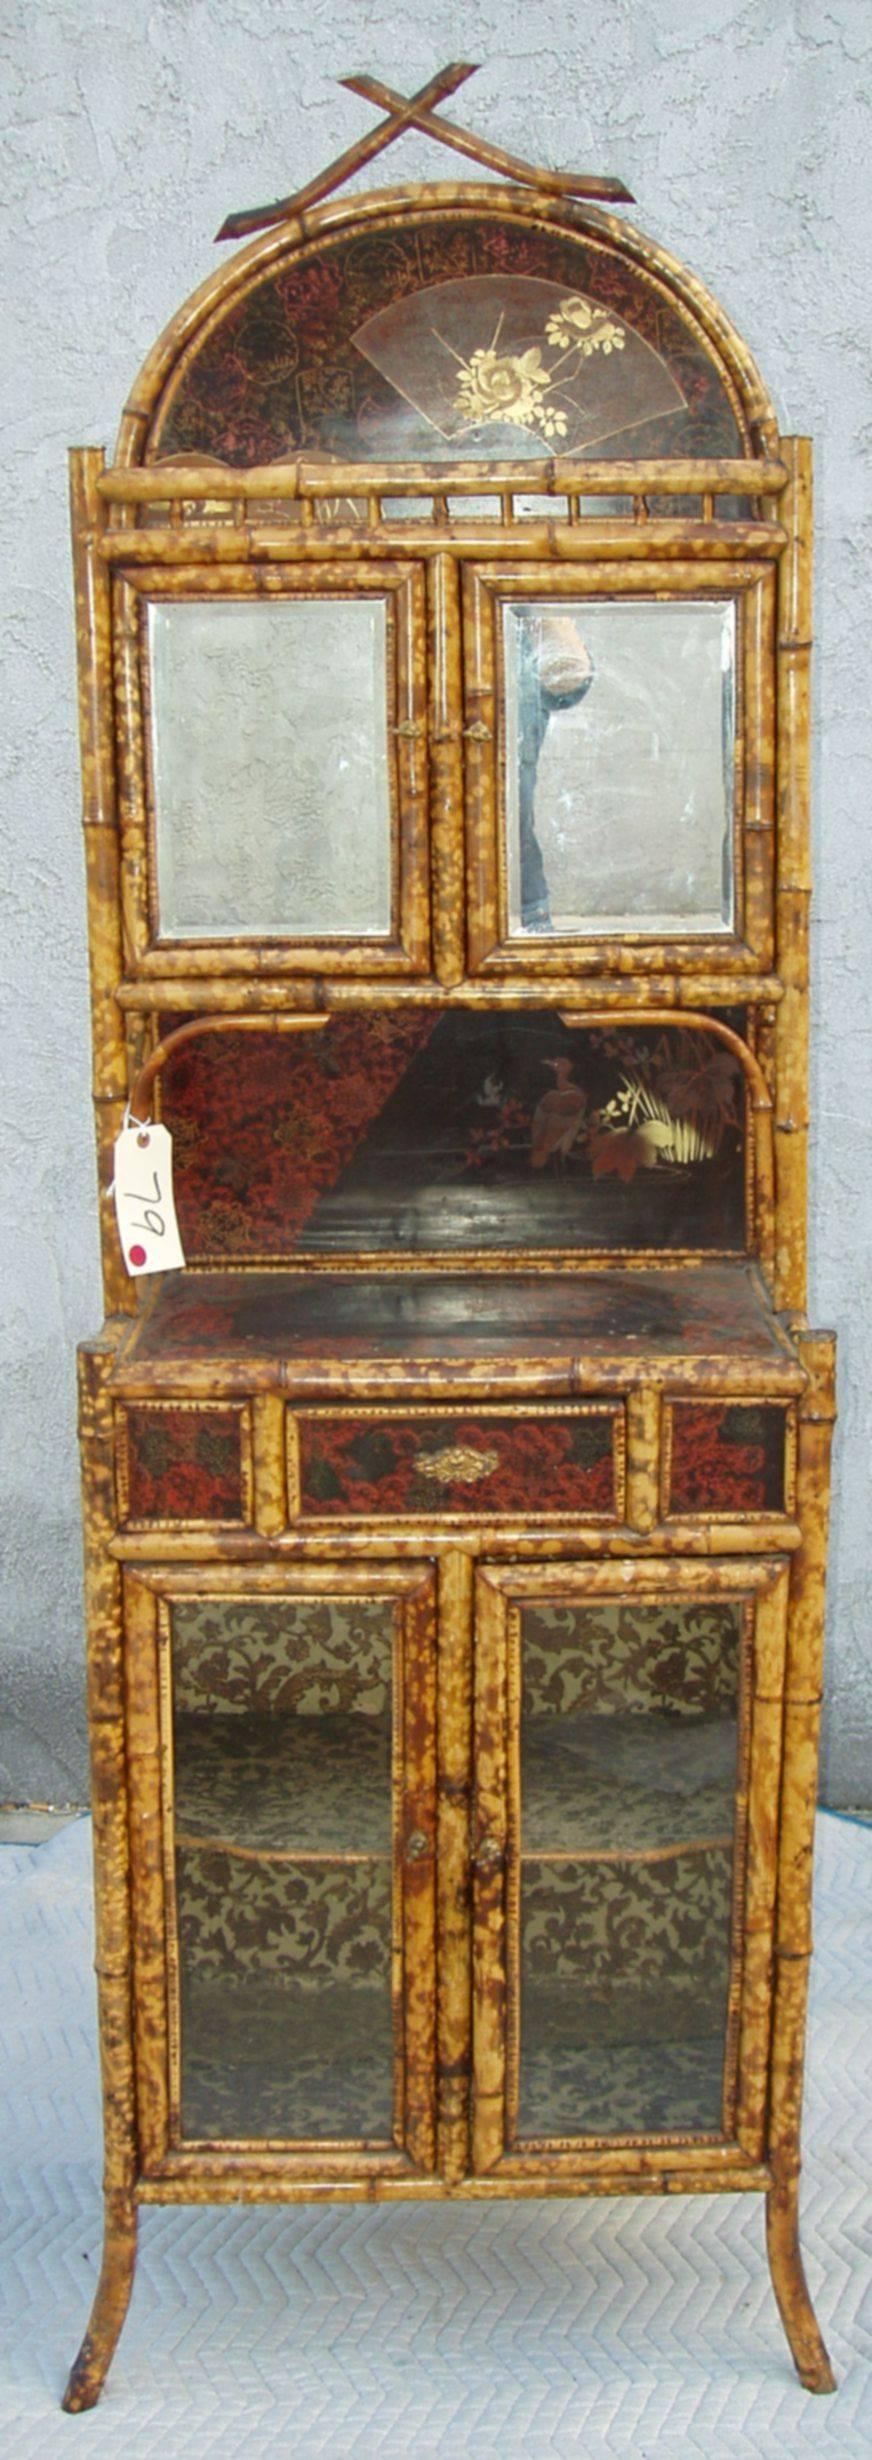 Superb English Bamboo Cabinet, 19th Century For Sale 2